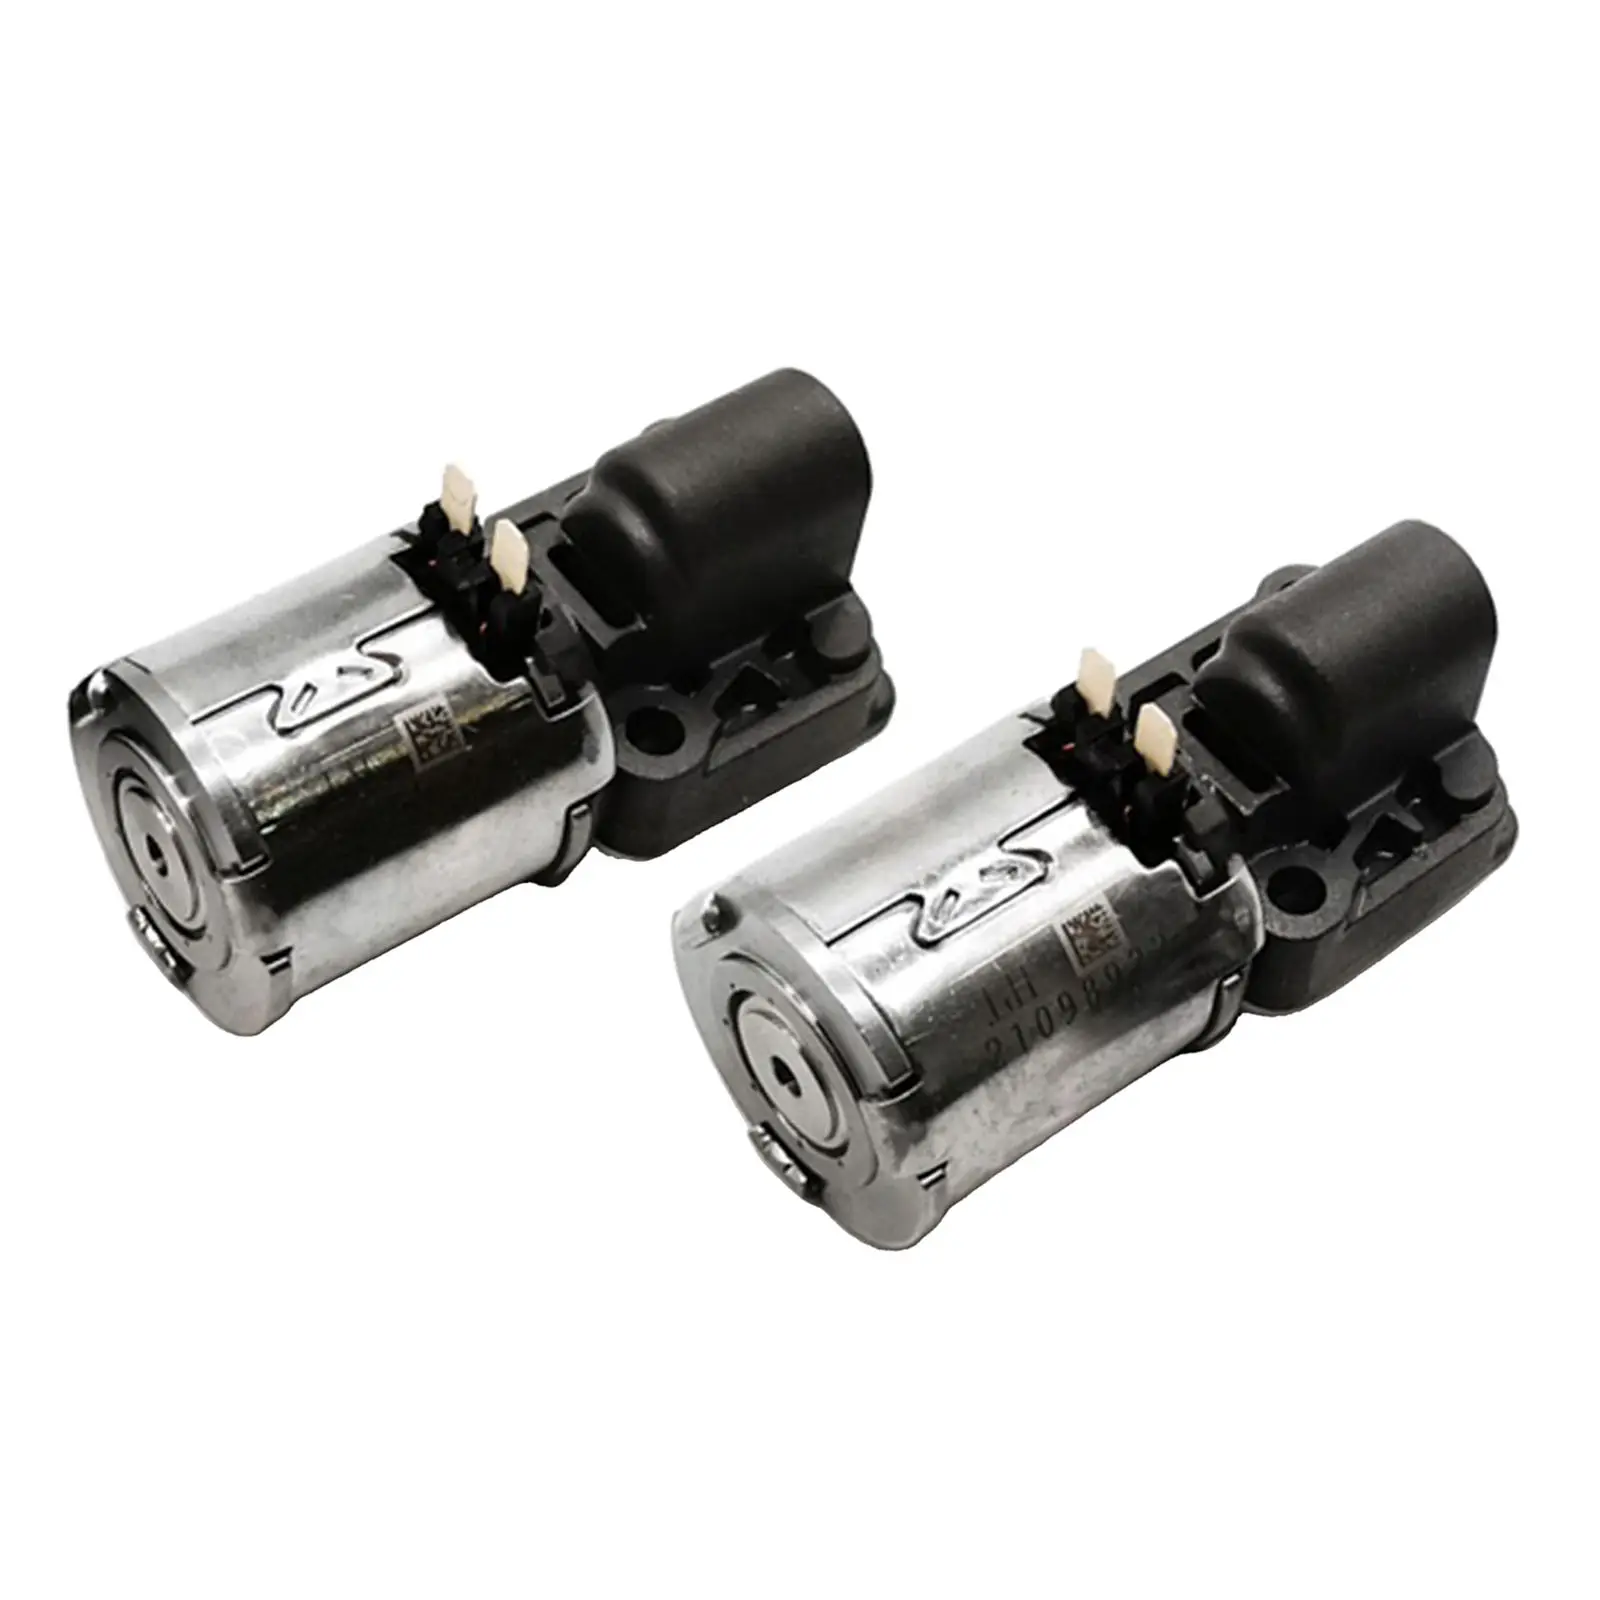 2x Auto Transmission Solenoid 0BH Dq500 Solenoid Valve for Audi A4 A5 A6 A7 Q5 2008-2011 for VW 7 Speed